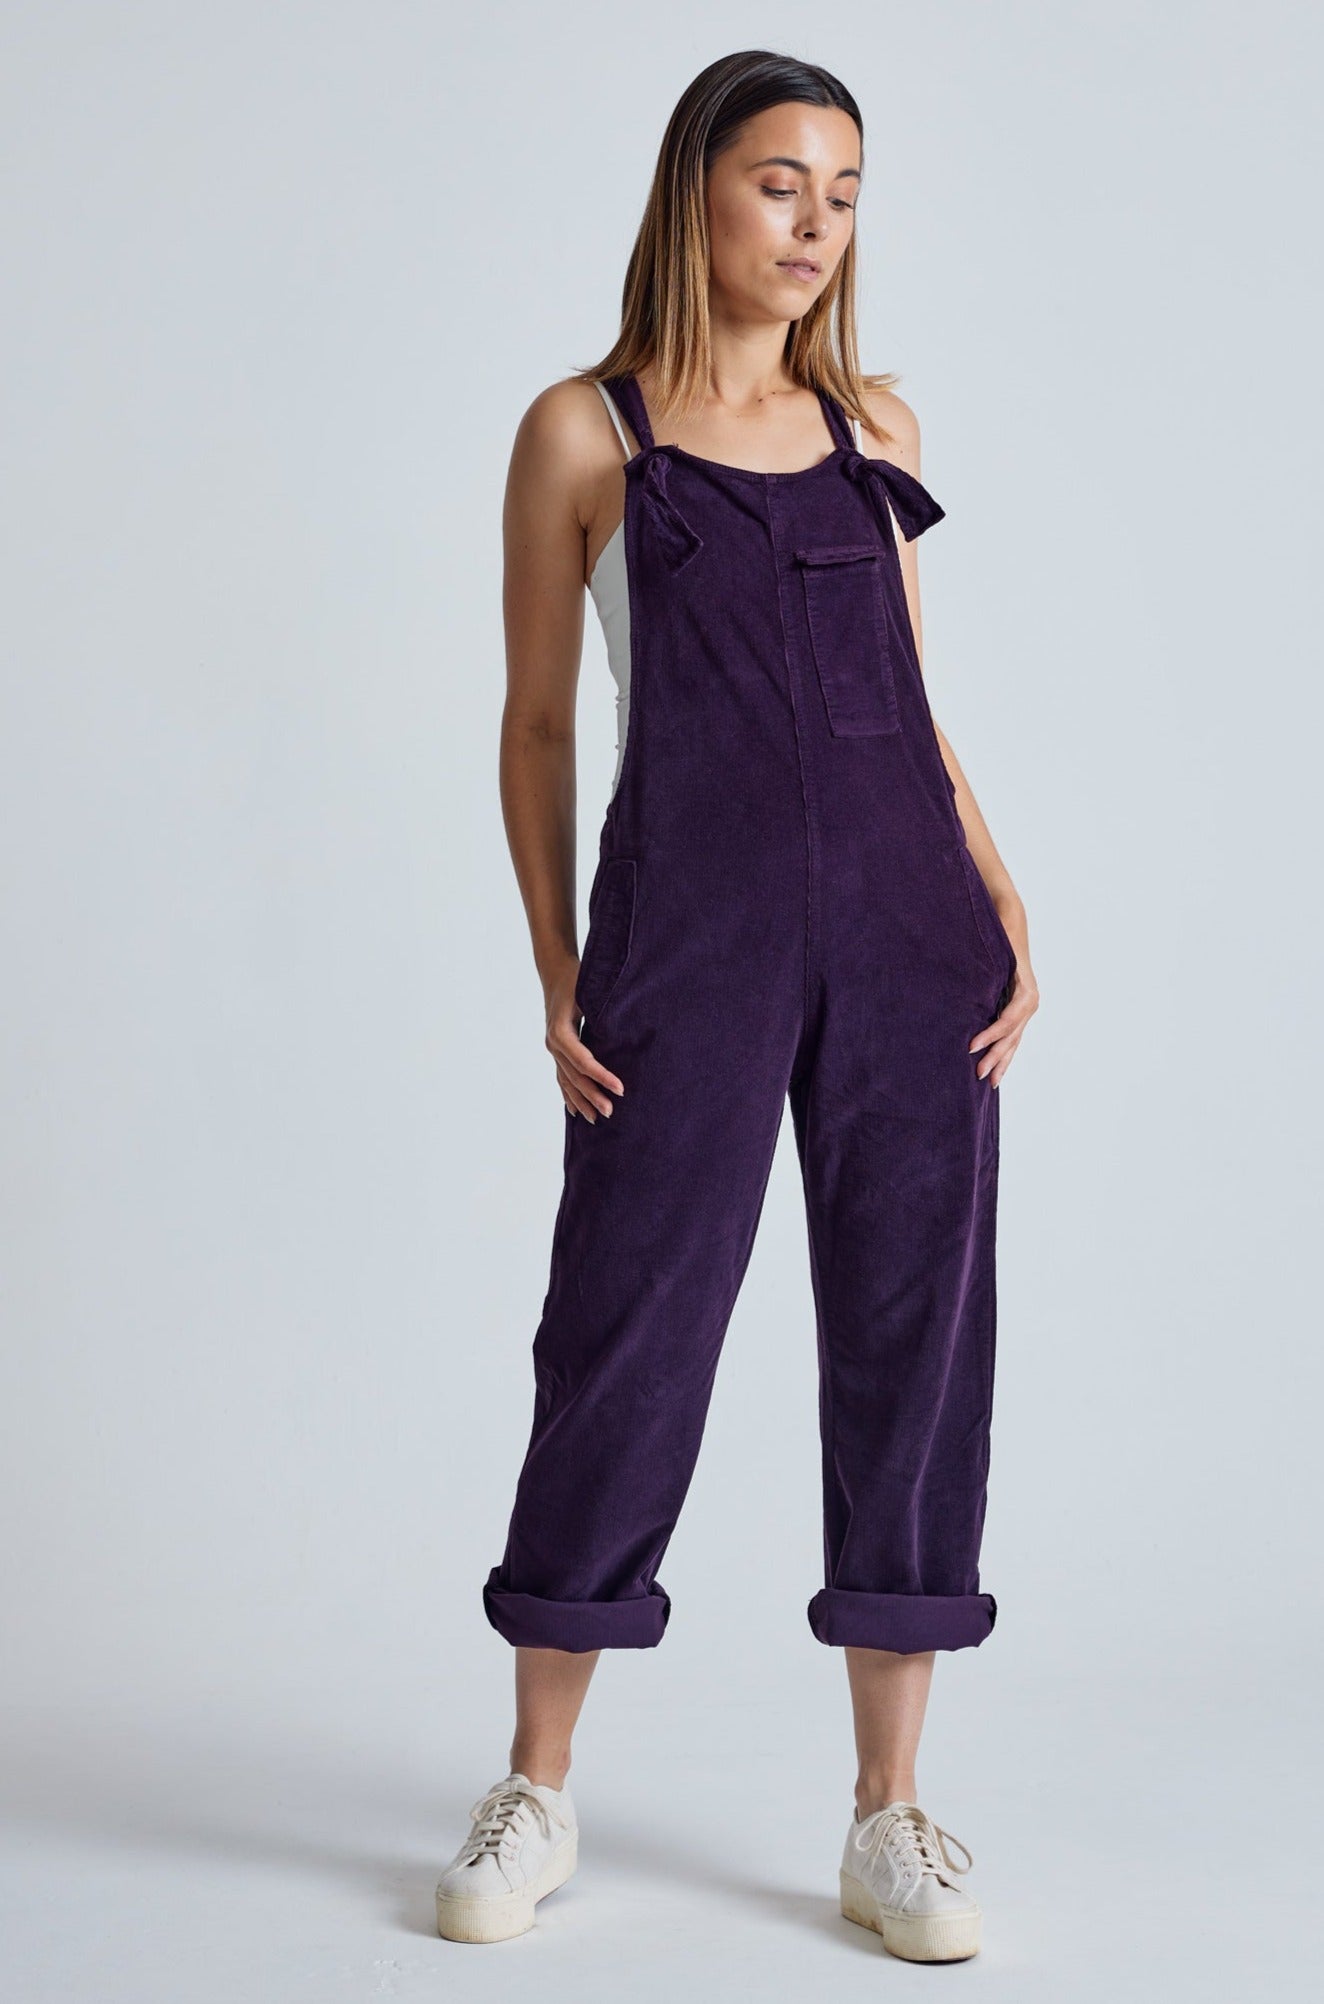 Aubergine Babycord Mary-Lou Pocket Dungaree - GOTS Certified Organic Cotton and Elastane